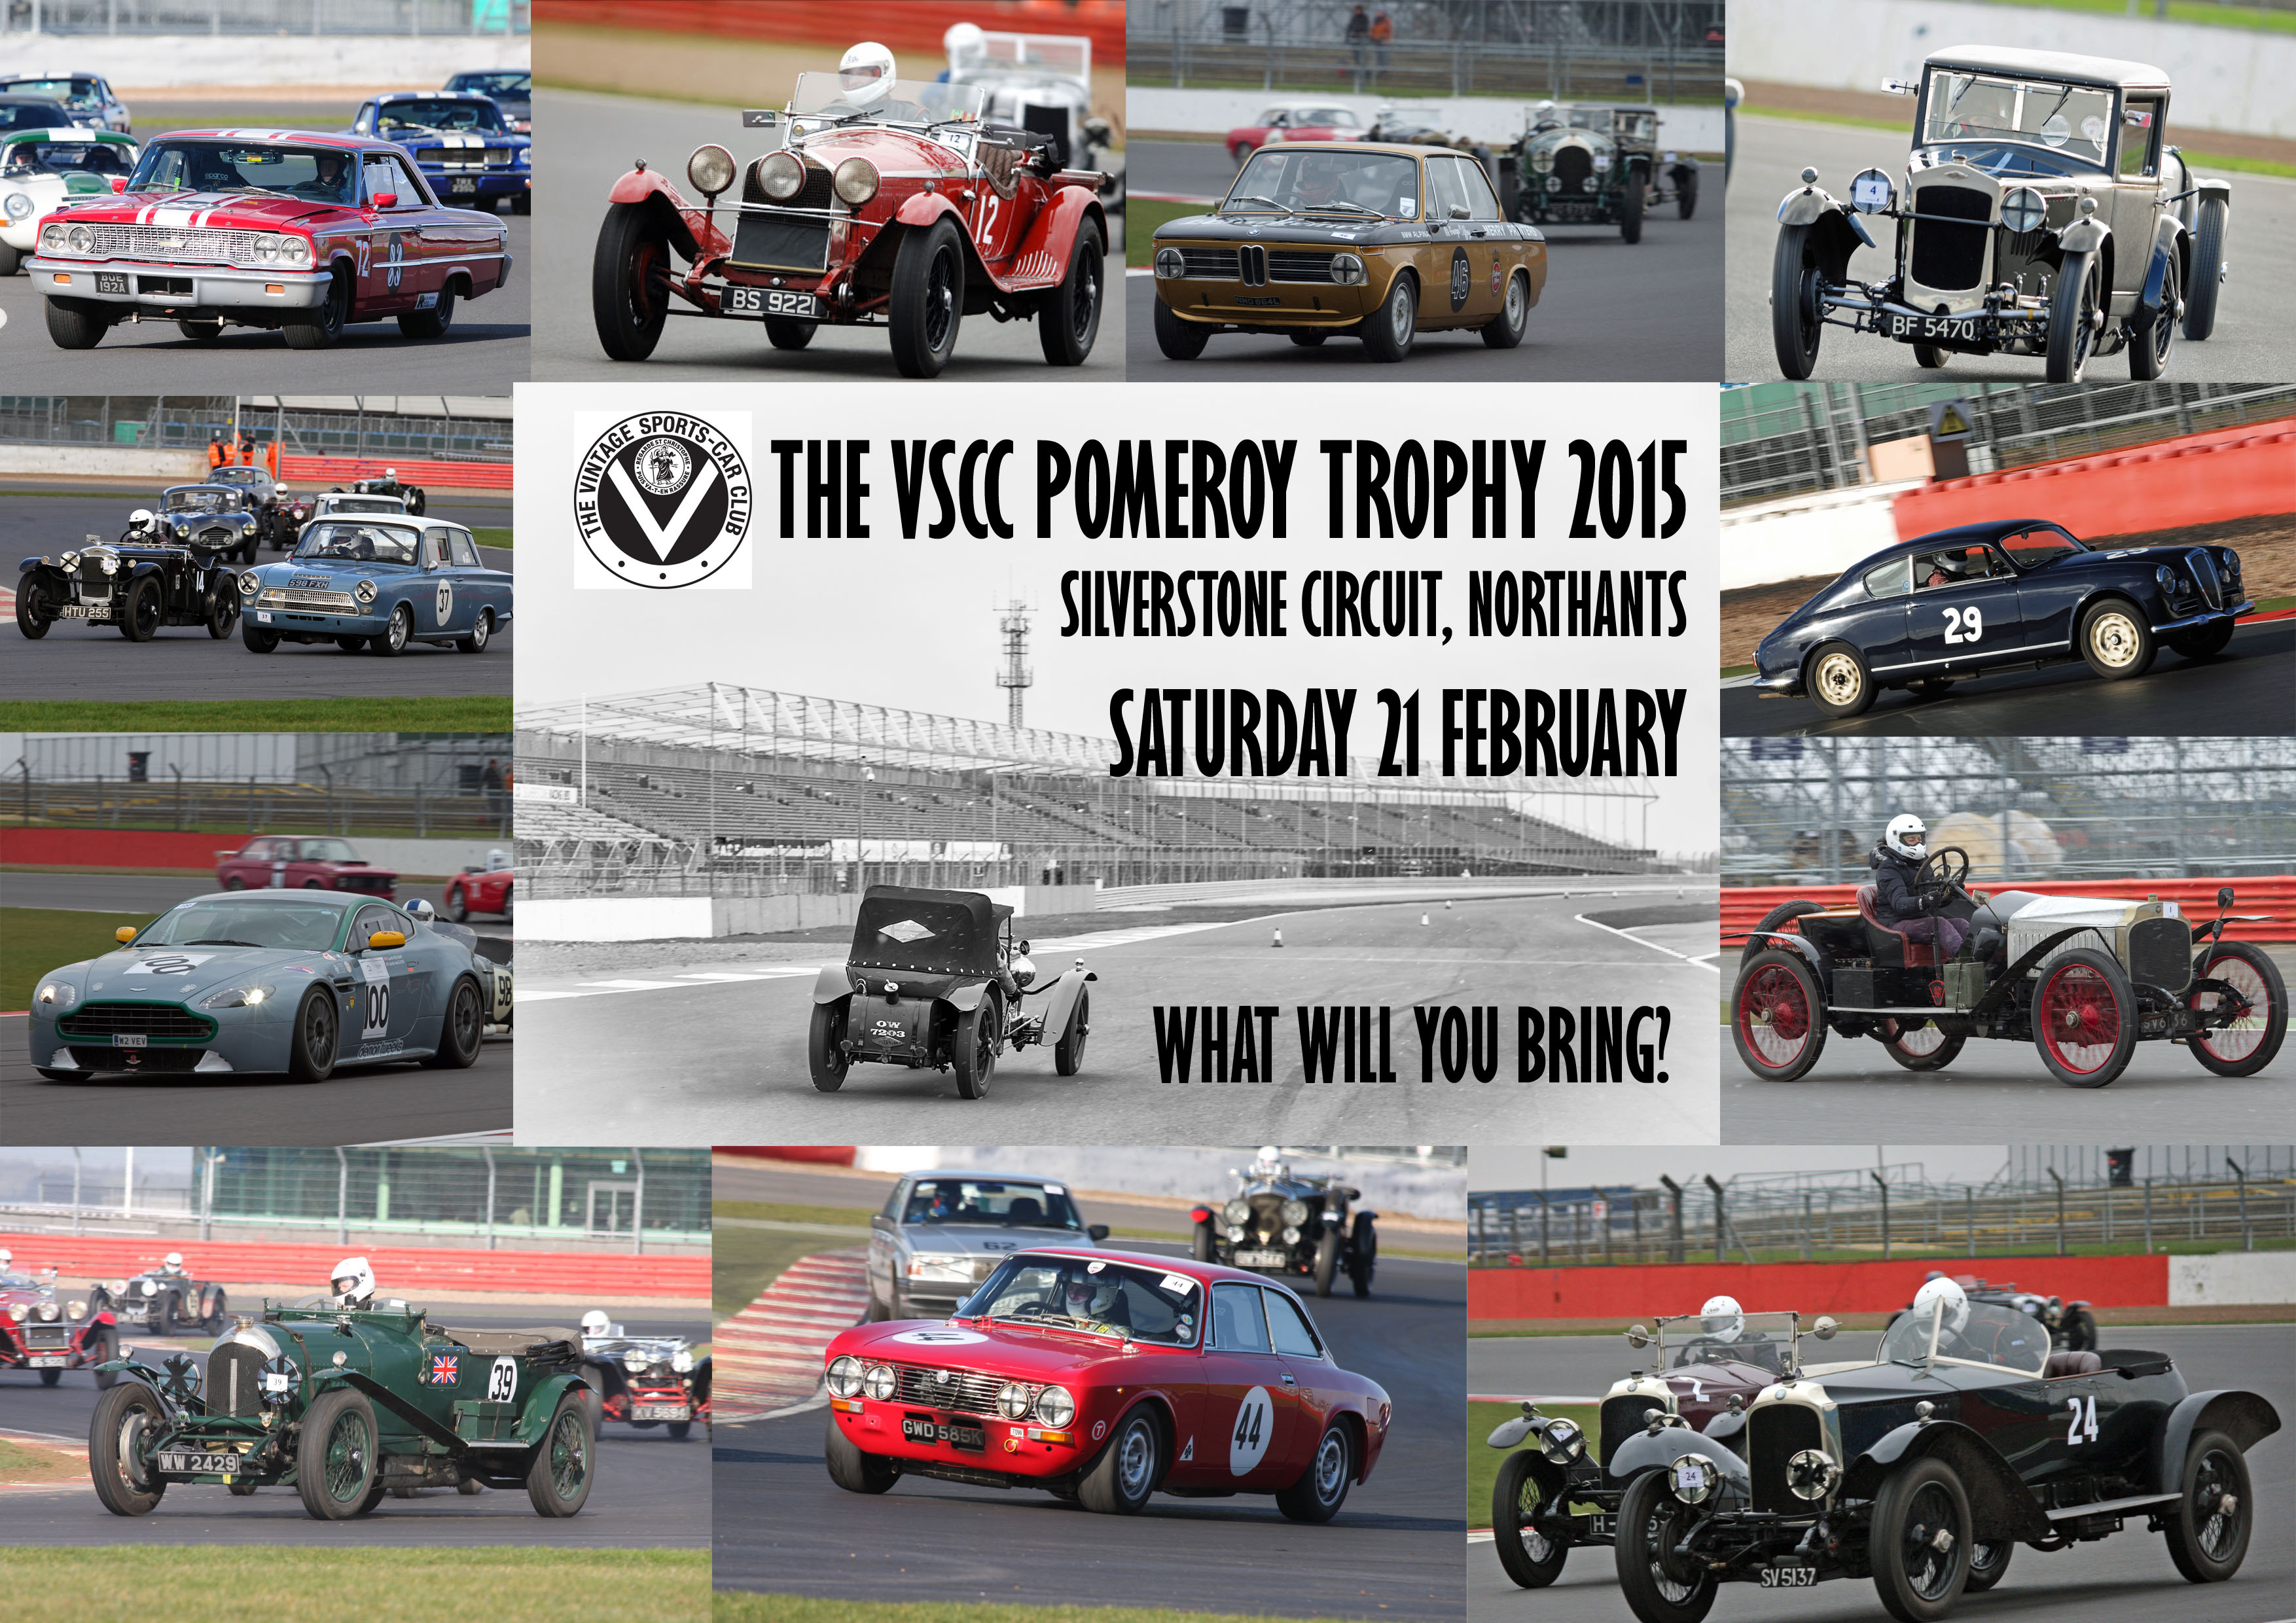 Calling all Club Racers – Late Entries Available for the ‘Pom’ taking place at Silverstone on 21 February! cover